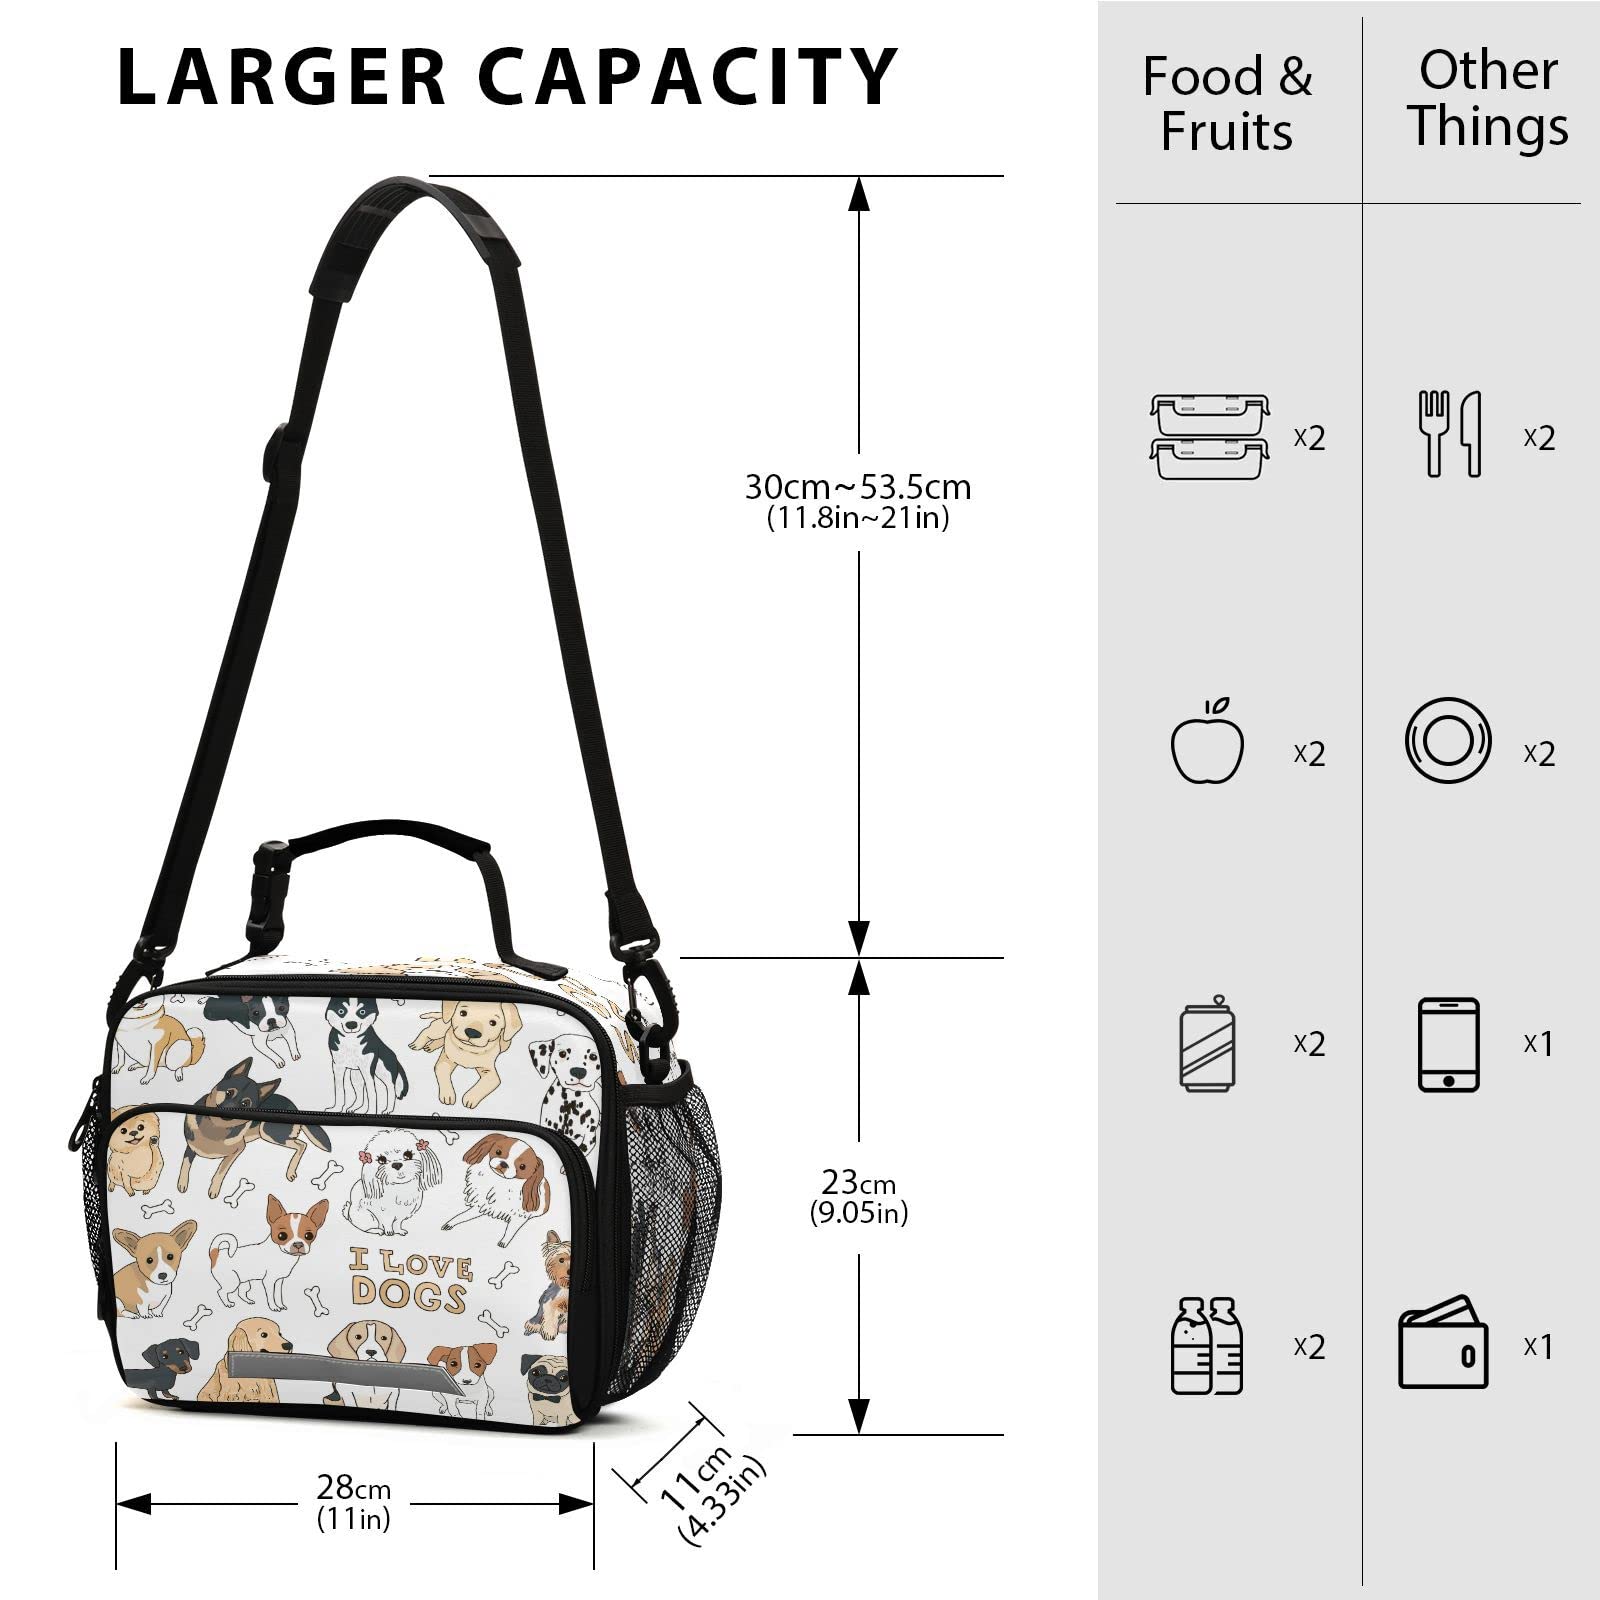 ALAZA Cute Dog Animal Doodle Lunch Bag Reusable Insulated Cooler Lunch Tote Bag With Adjustable Shoulder Strap For Office Work Picnic Travel,Size 11 X 4.33 X 9.05 Inch